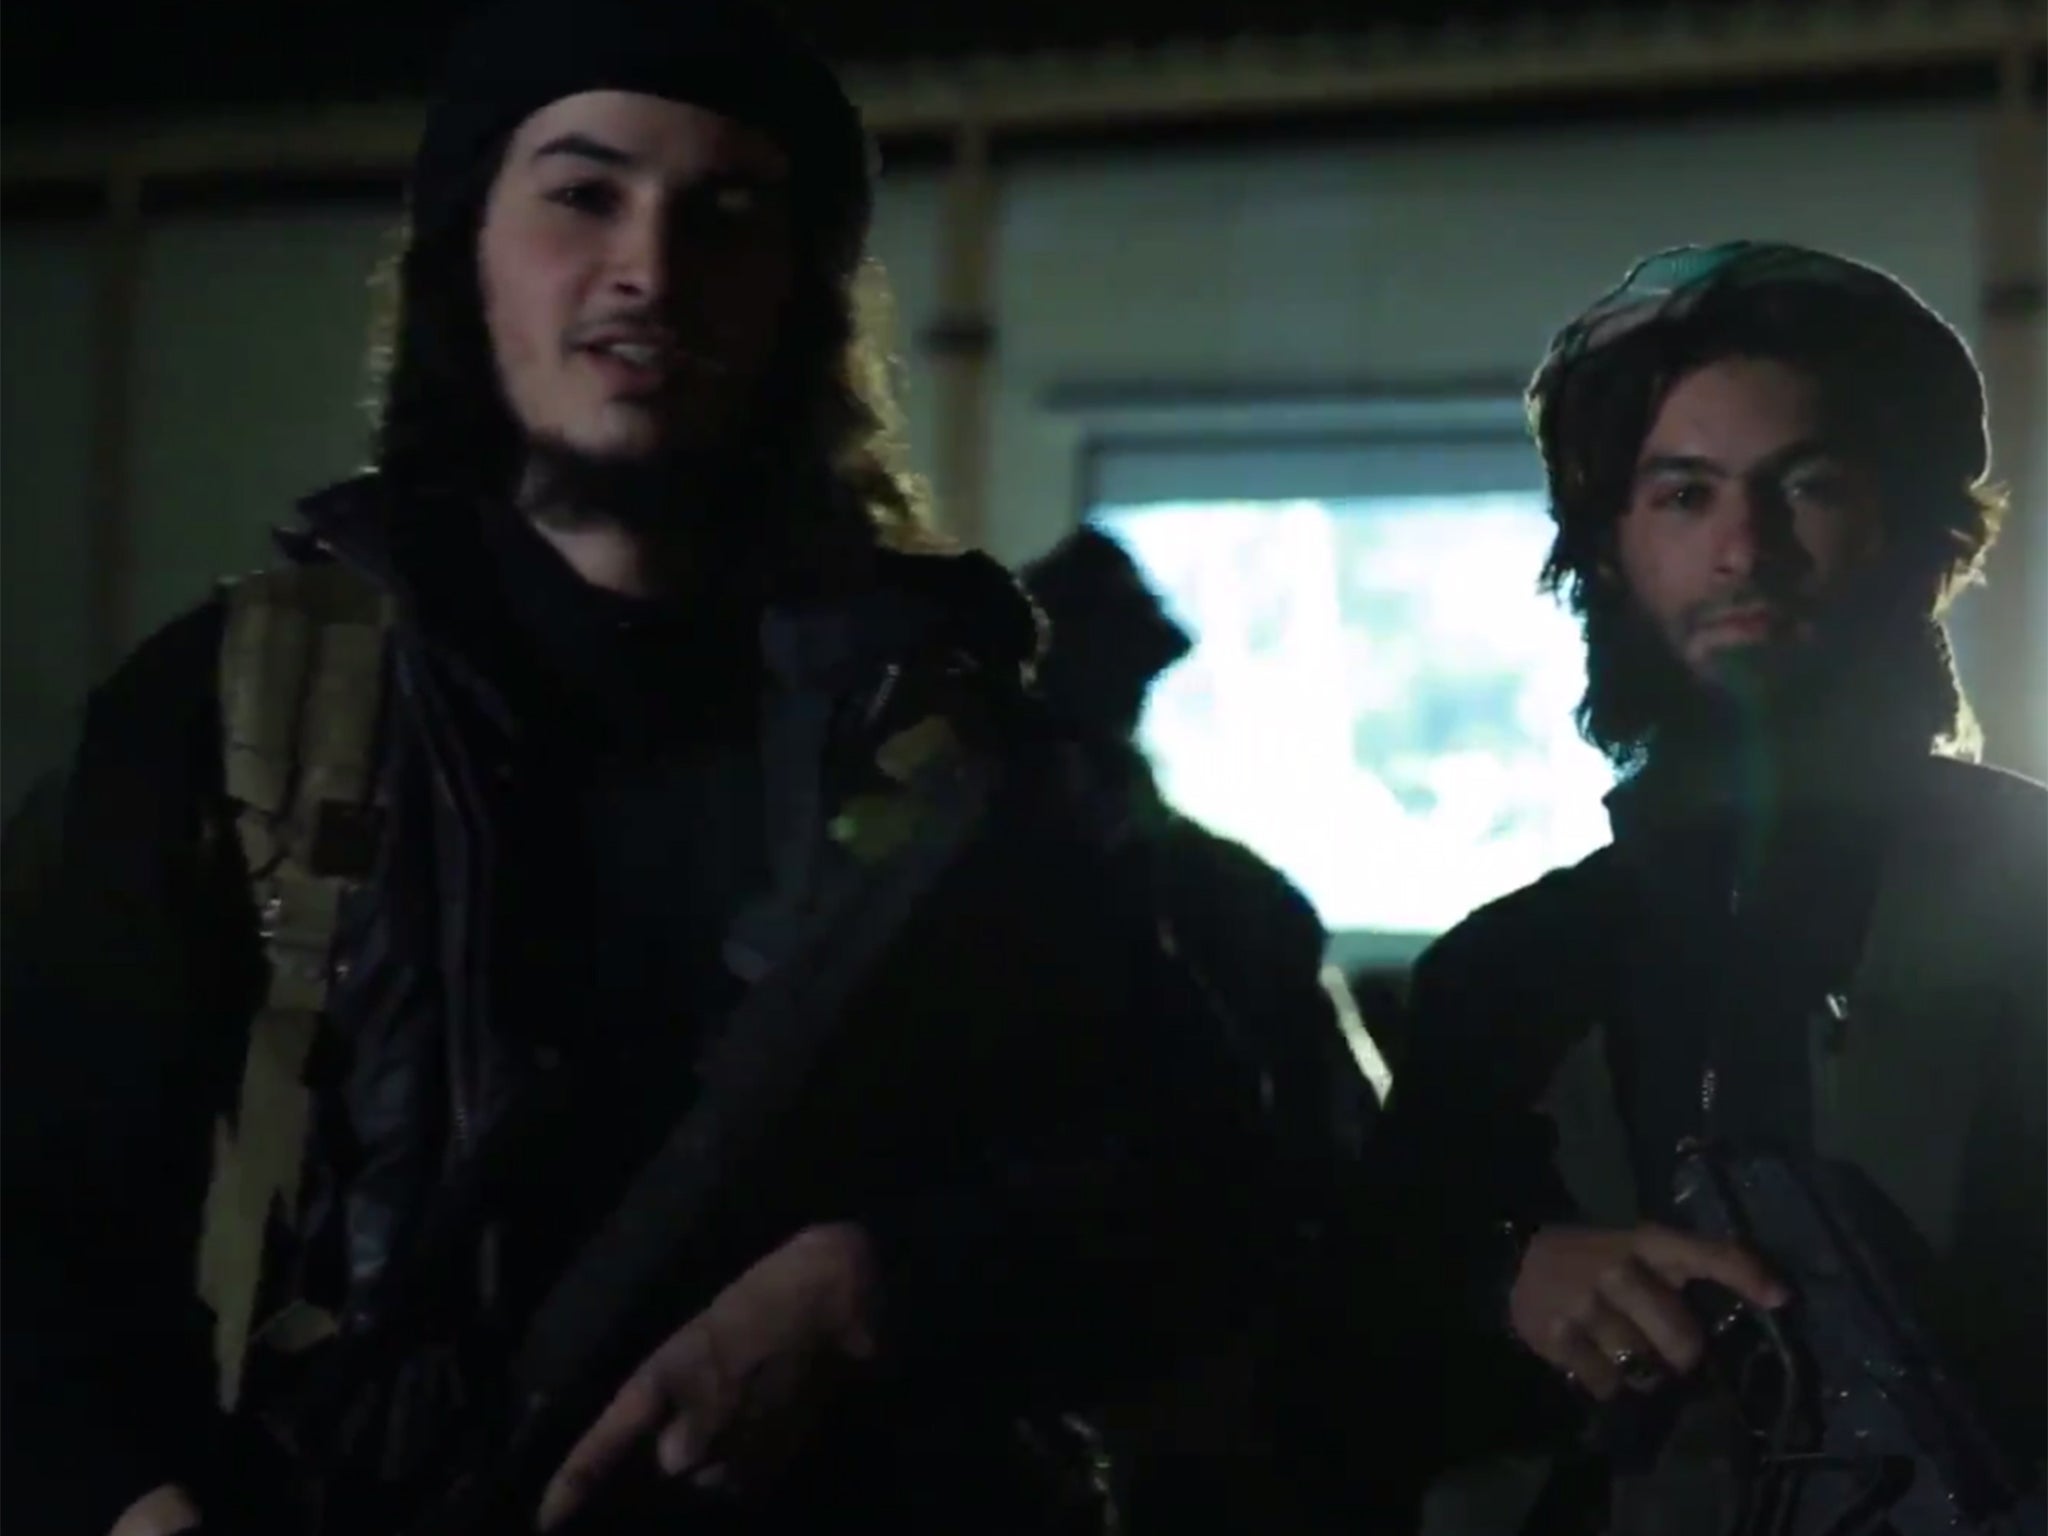 Belgian Isis fighter Abu Abdullah al-Beljiki (left) warns the attacks are 'just the beginning of your nightmare'